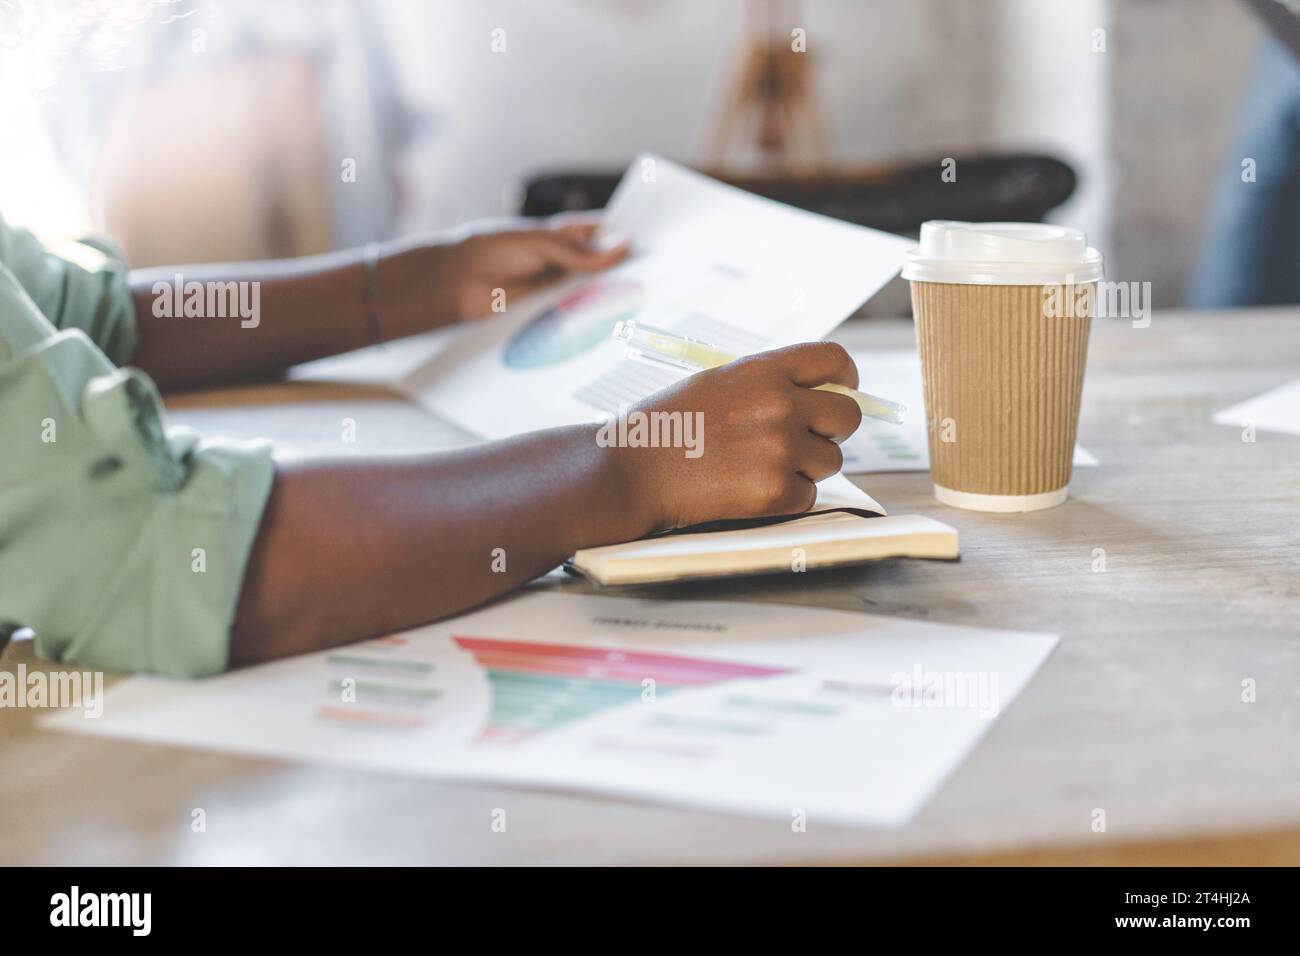 A detailed shot captures hands pointing at colorful graphs, suggesting a deep analysis or study session. Adjacent to the hands, a notebook is ready fo Stock Photo